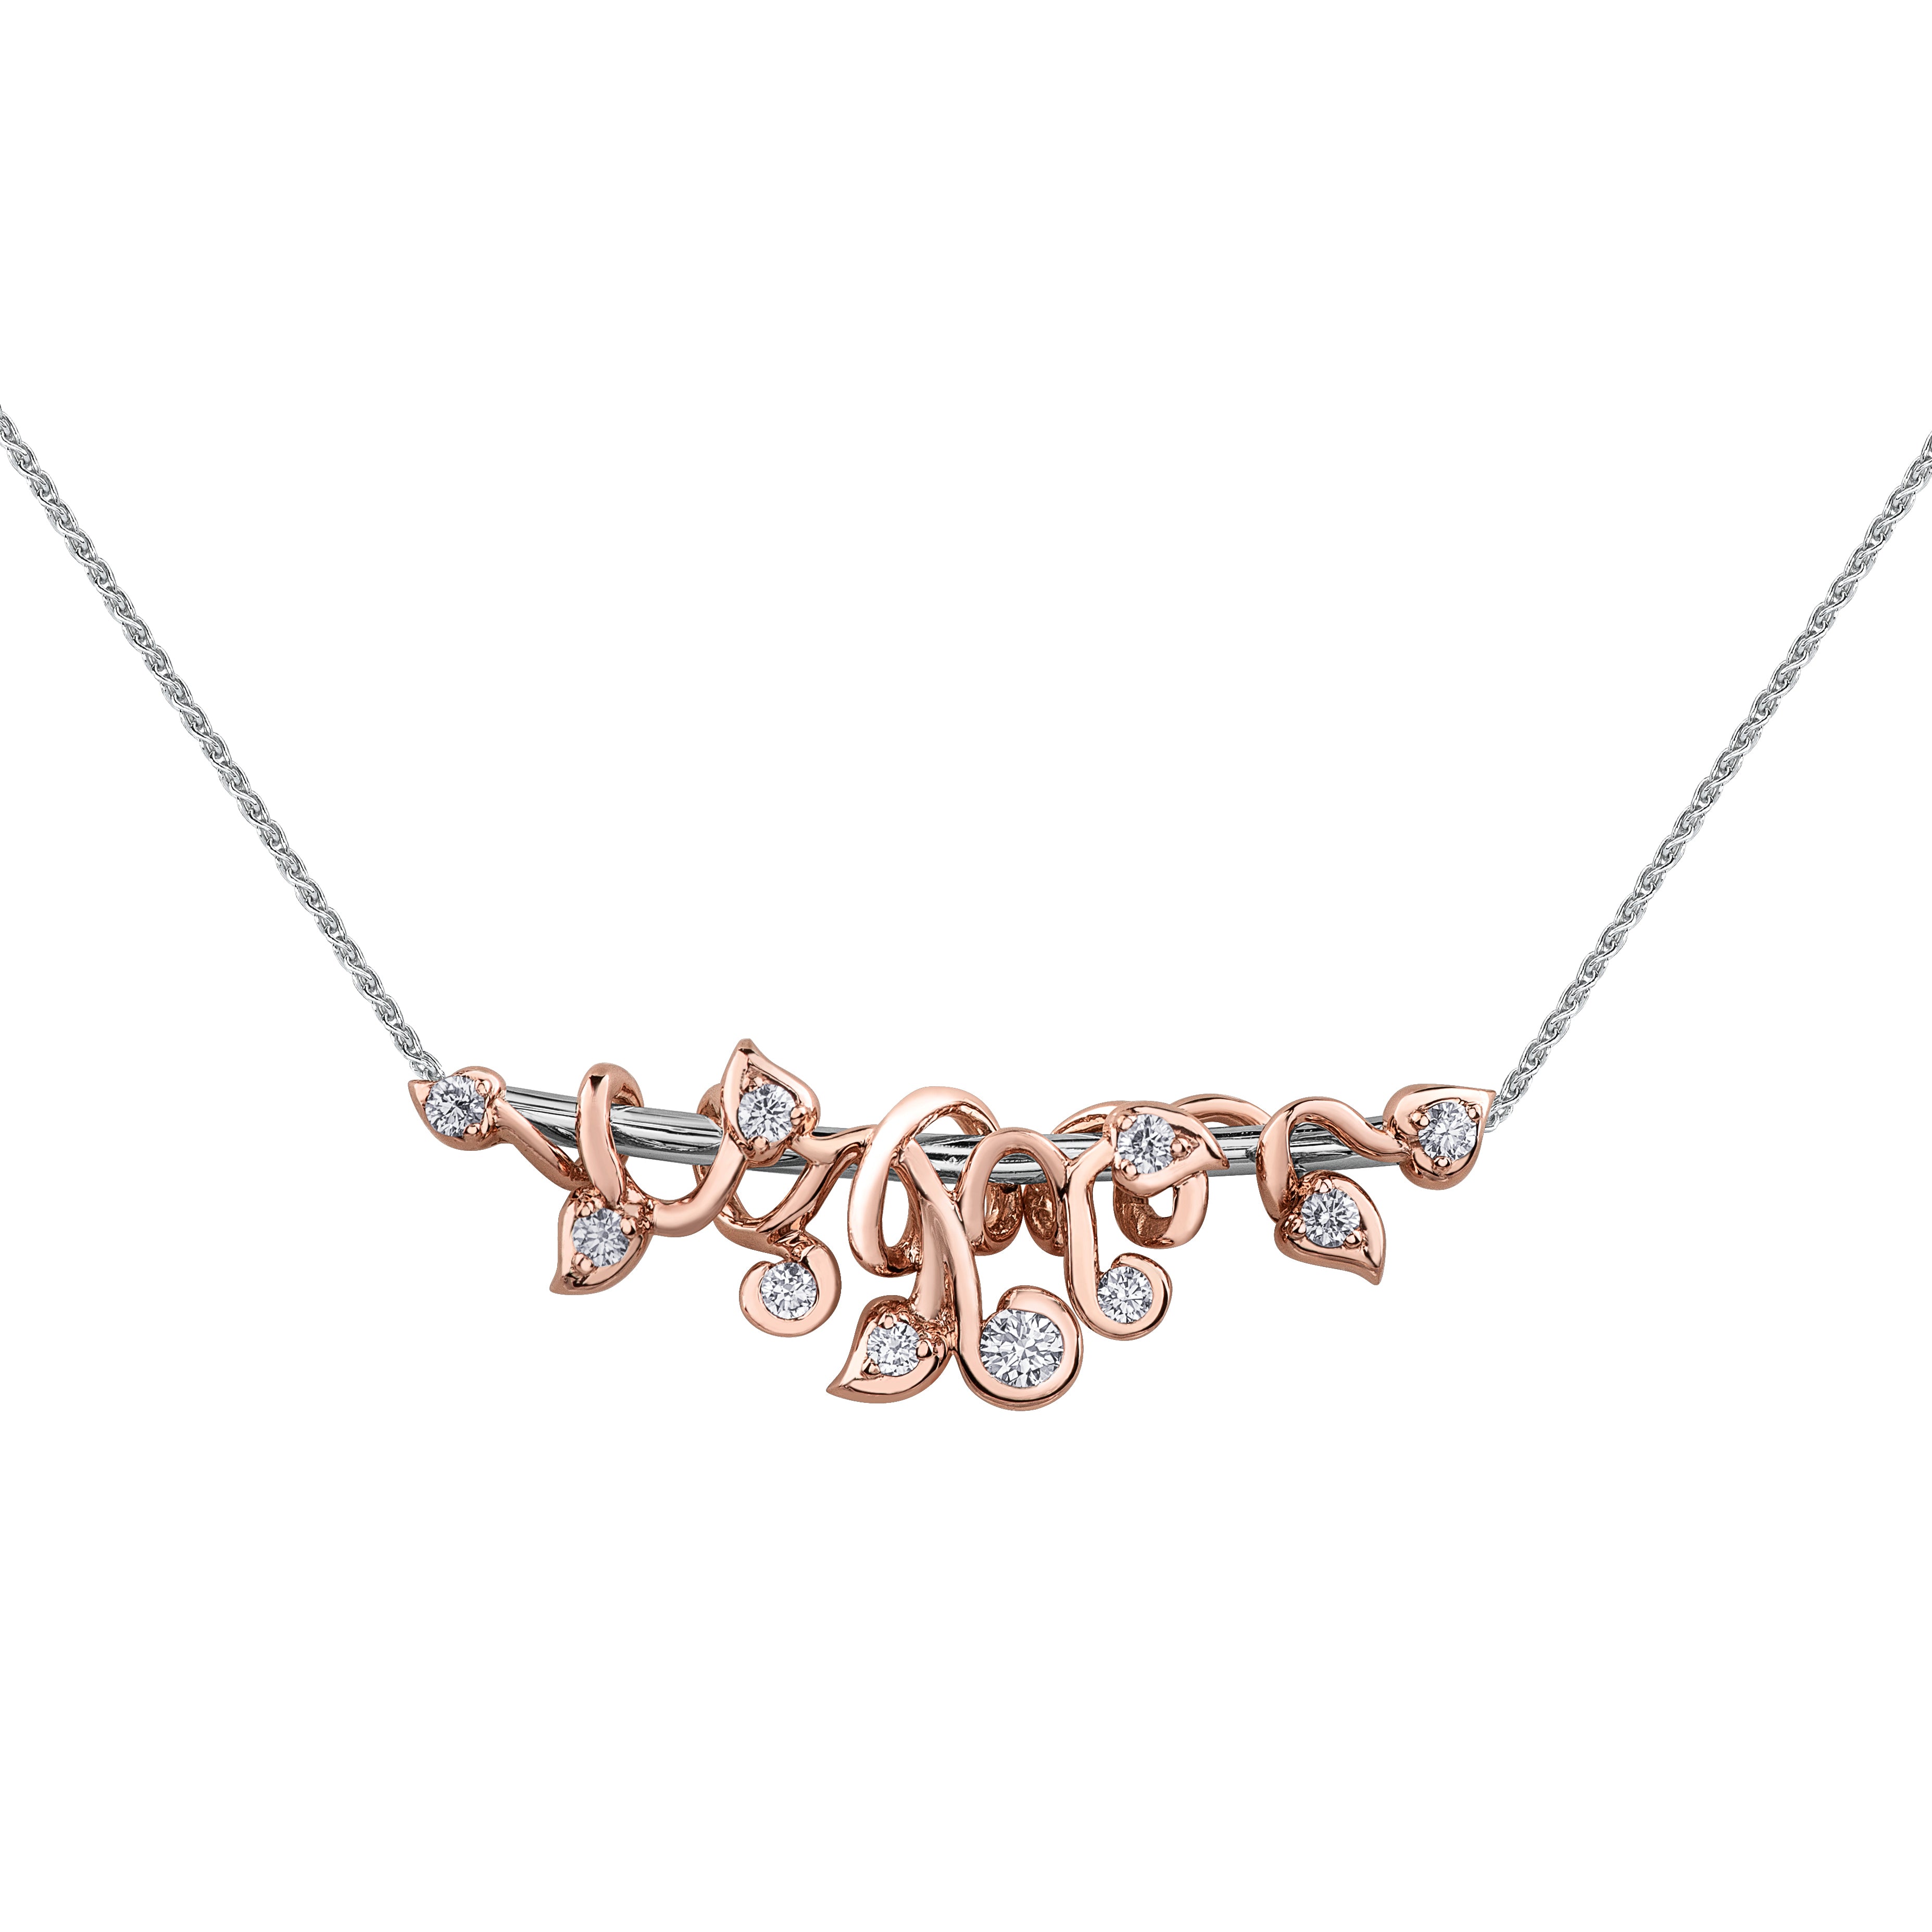 Crafted in 14KT white Canadian Certified Gold, this pendant features a branch wrapped with 14KT rose Canadian Certified Gold vines set with round brilliant-cut Canadian diamonds.